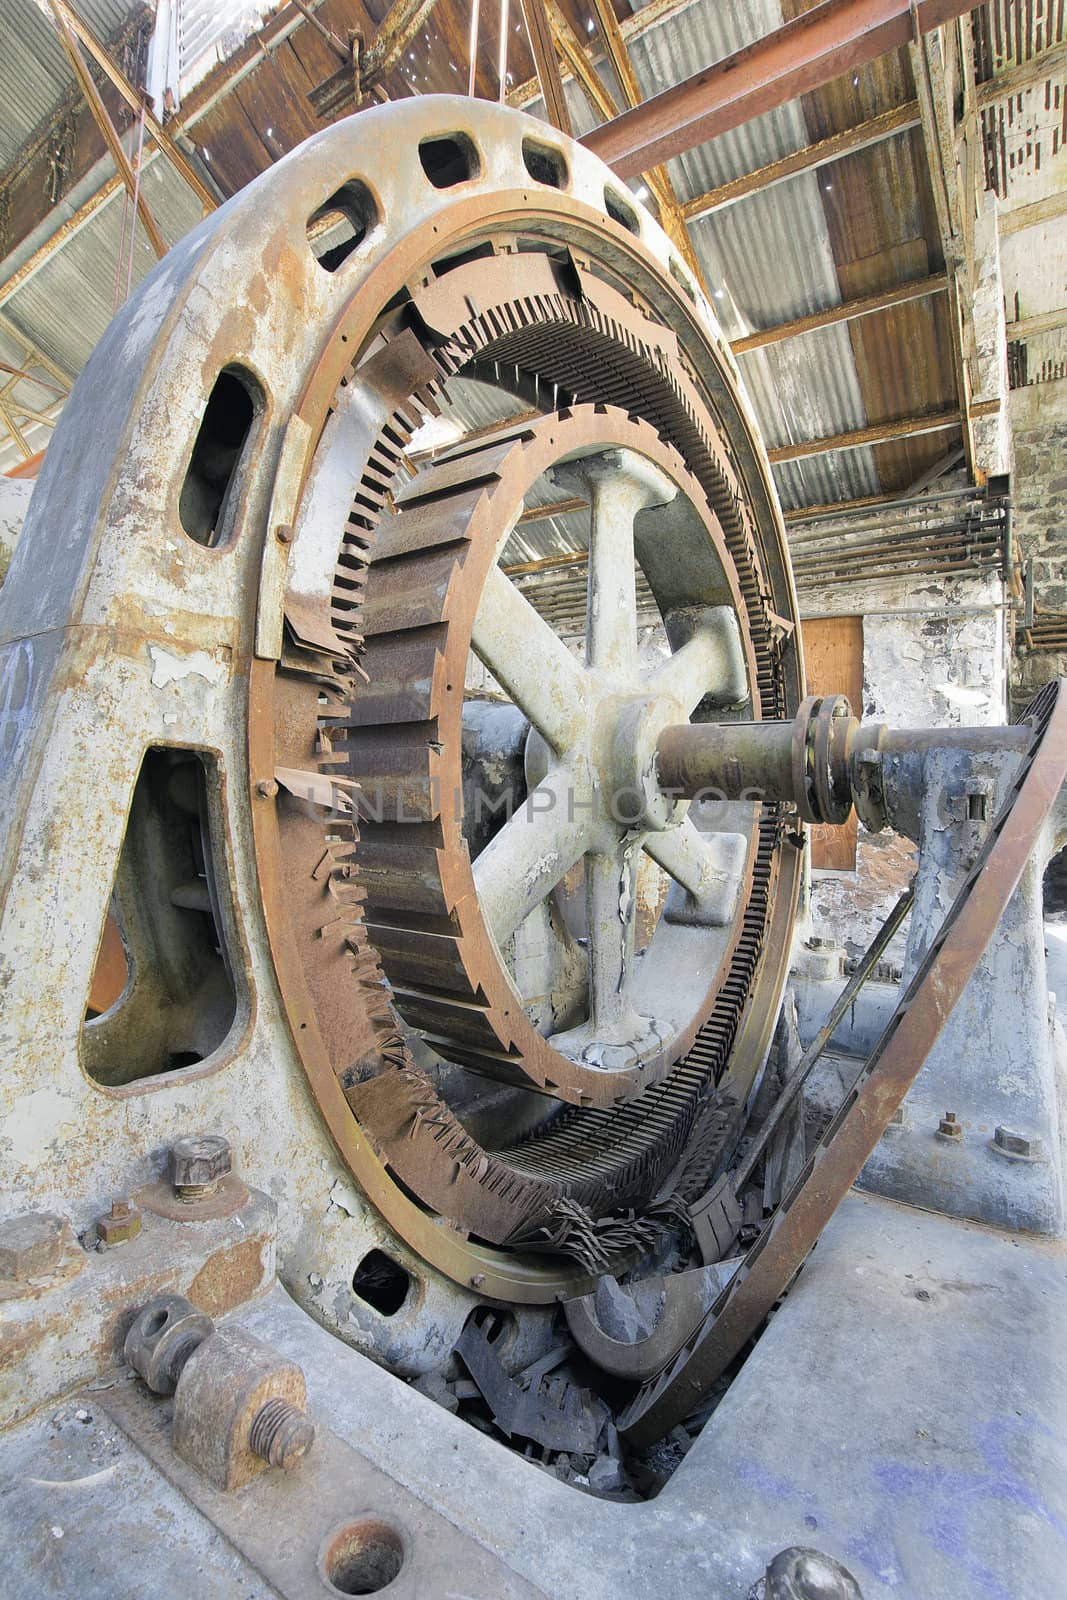 Old Abandoned Hydroelectric Power Plant Station Turbine Electricity Generator Closeup